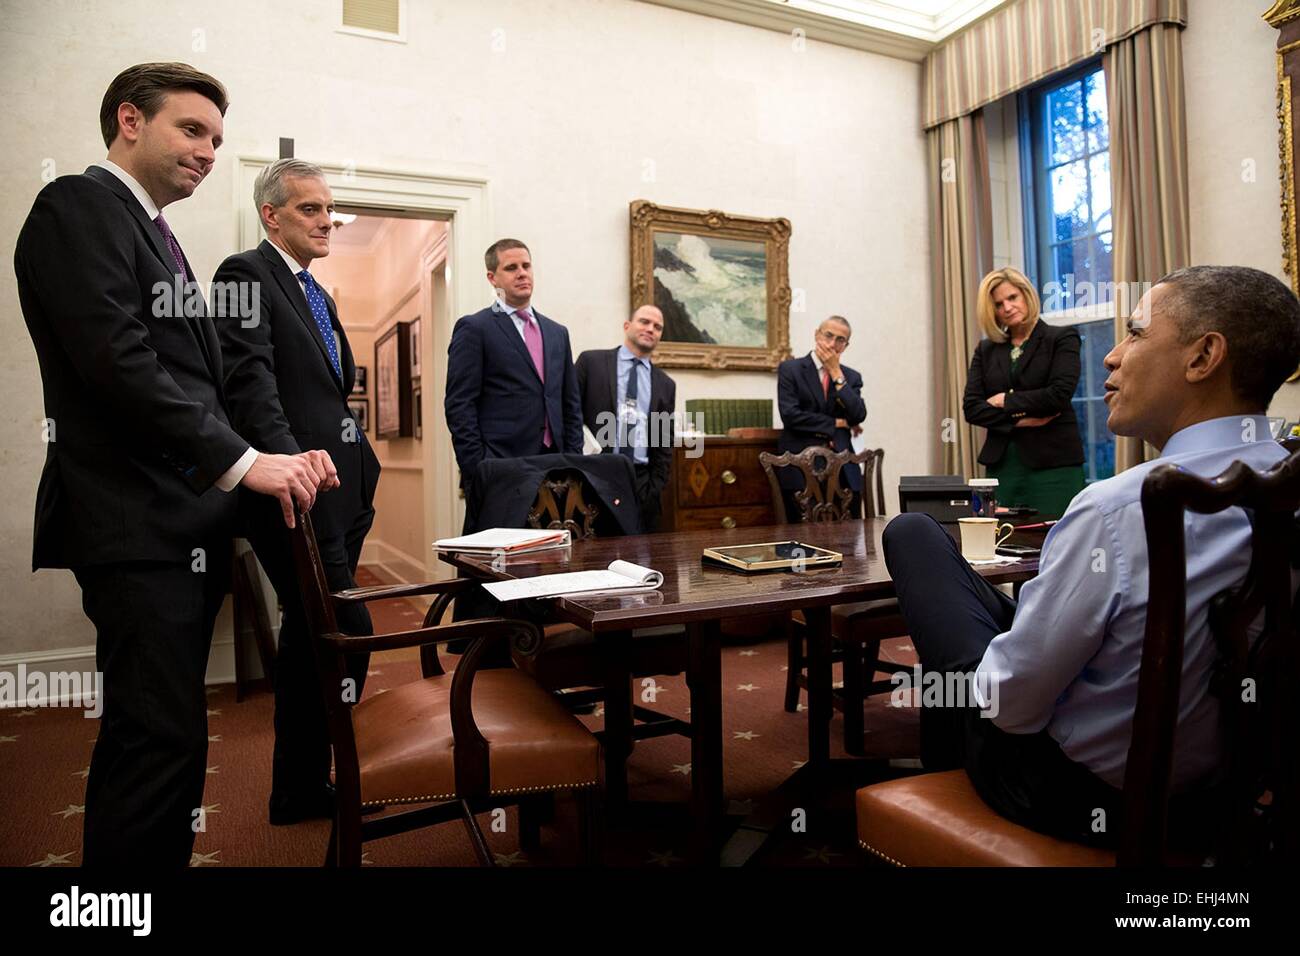 US President Barack Obama meets with, from left, Press Secretary Josh Earnest; Chief of Staff Denis McDonough; Senior Advisor Dan Pfeiffer; Ben Rhodes, Deputy National Security Advisor for Strategic Communications; John Podesta, Counselor to the President and Jennifer Palmieri, Director of Communications, in the Oval Office Private Dining Room to prep for a CBS Face the Nation interview with Bob Schieffer November 7, 2014 in Washington, DC. Stock Photo